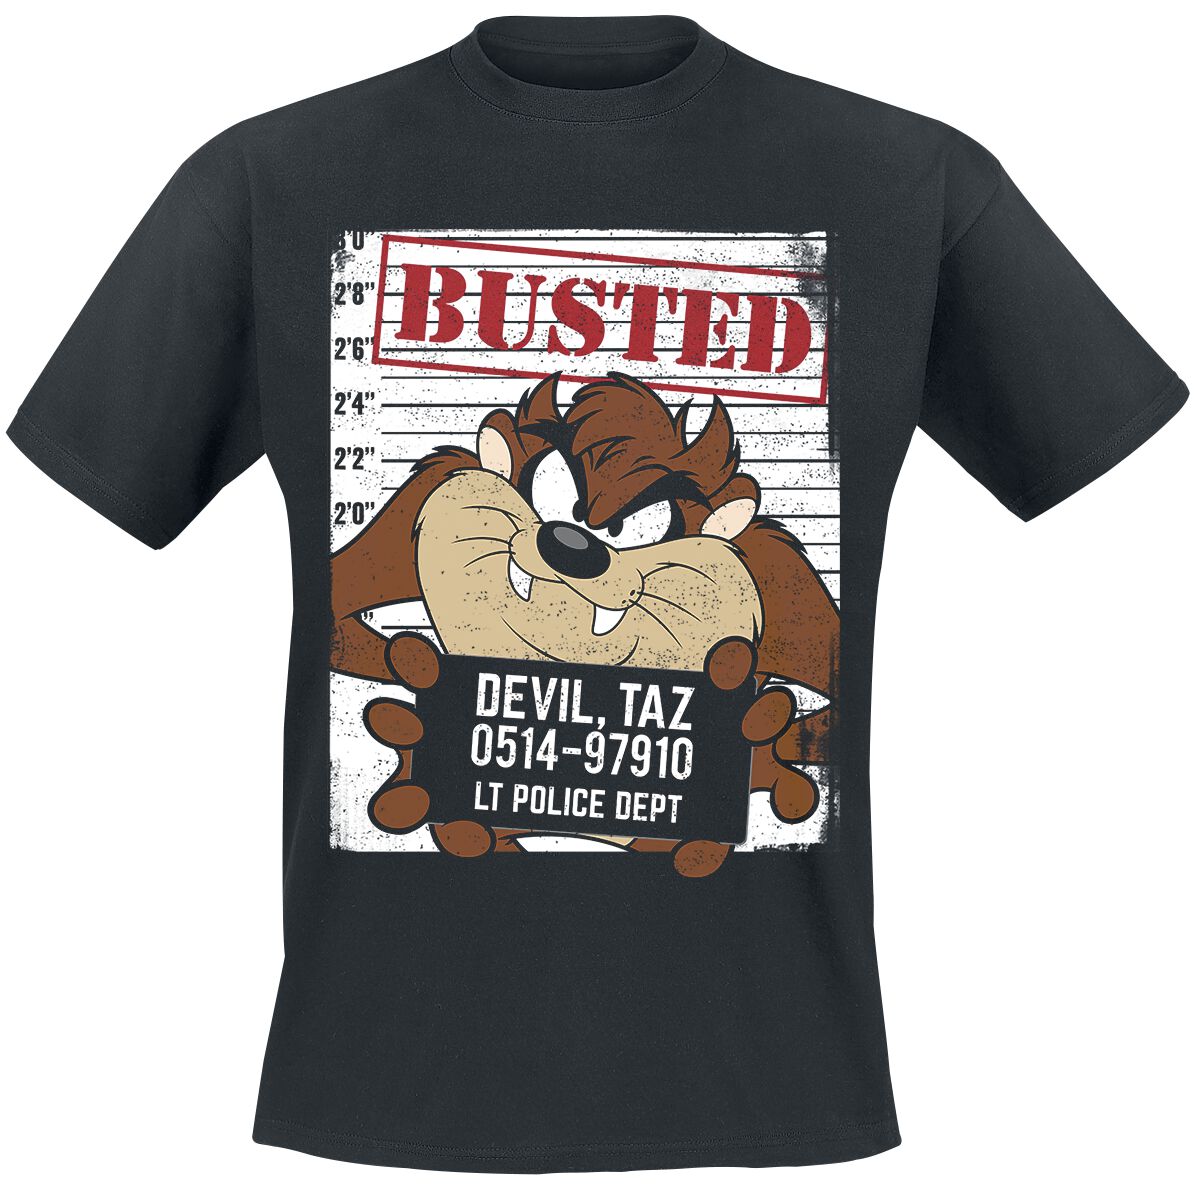 Looney Tunes Taz - Busted! T-Shirt black